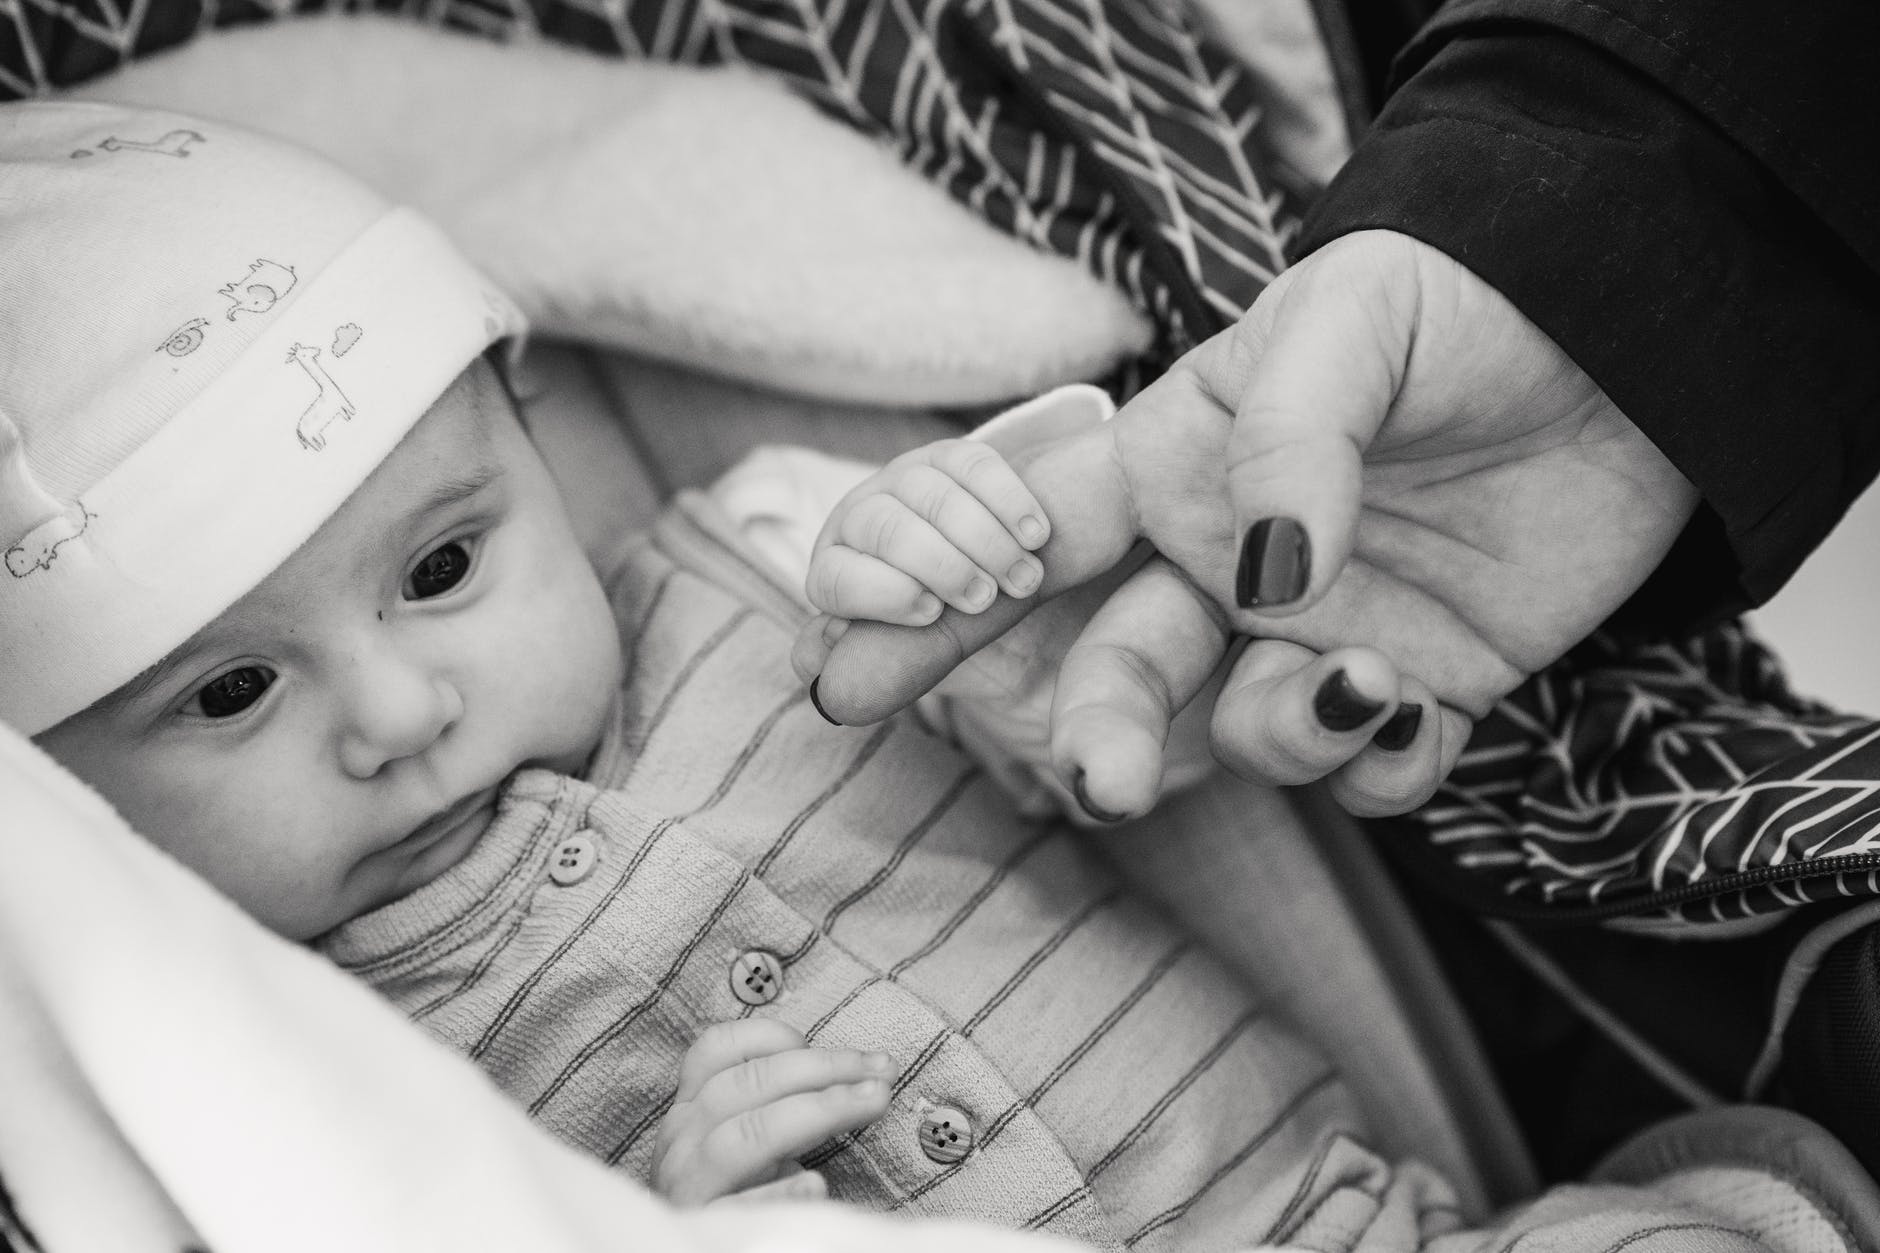 Ivanna took the baby home and got him checked out. | Source: Pexels